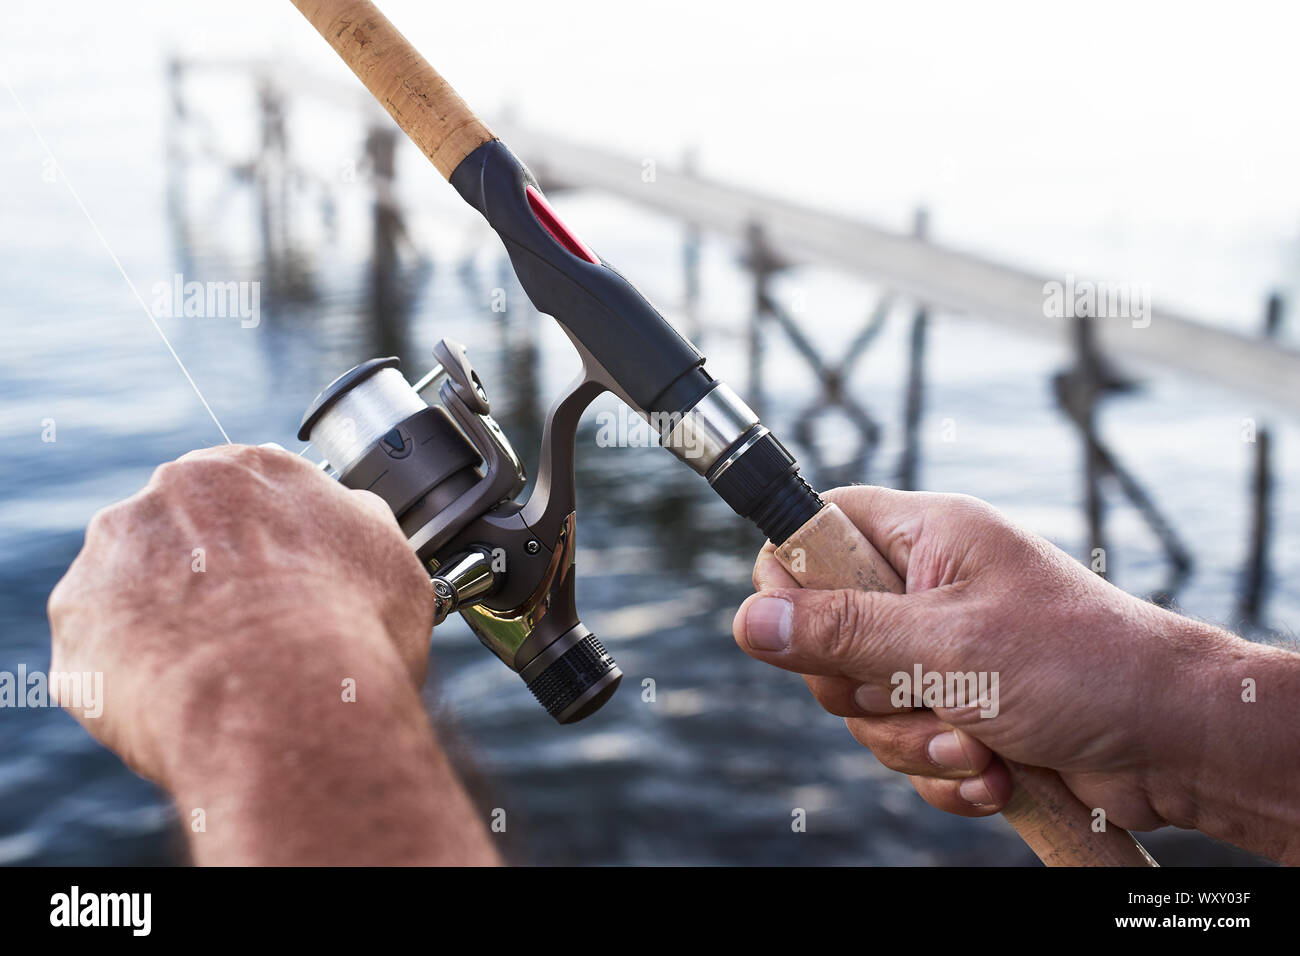 https://c8.alamy.com/comp/WXY03F/the-hands-of-an-adult-man-holding-a-sport-fishing-rod-with-reel-and-line-in-the-background-the-sea-or-a-lake-with-a-wooden-jetty-or-pier-WXY03F.jpg